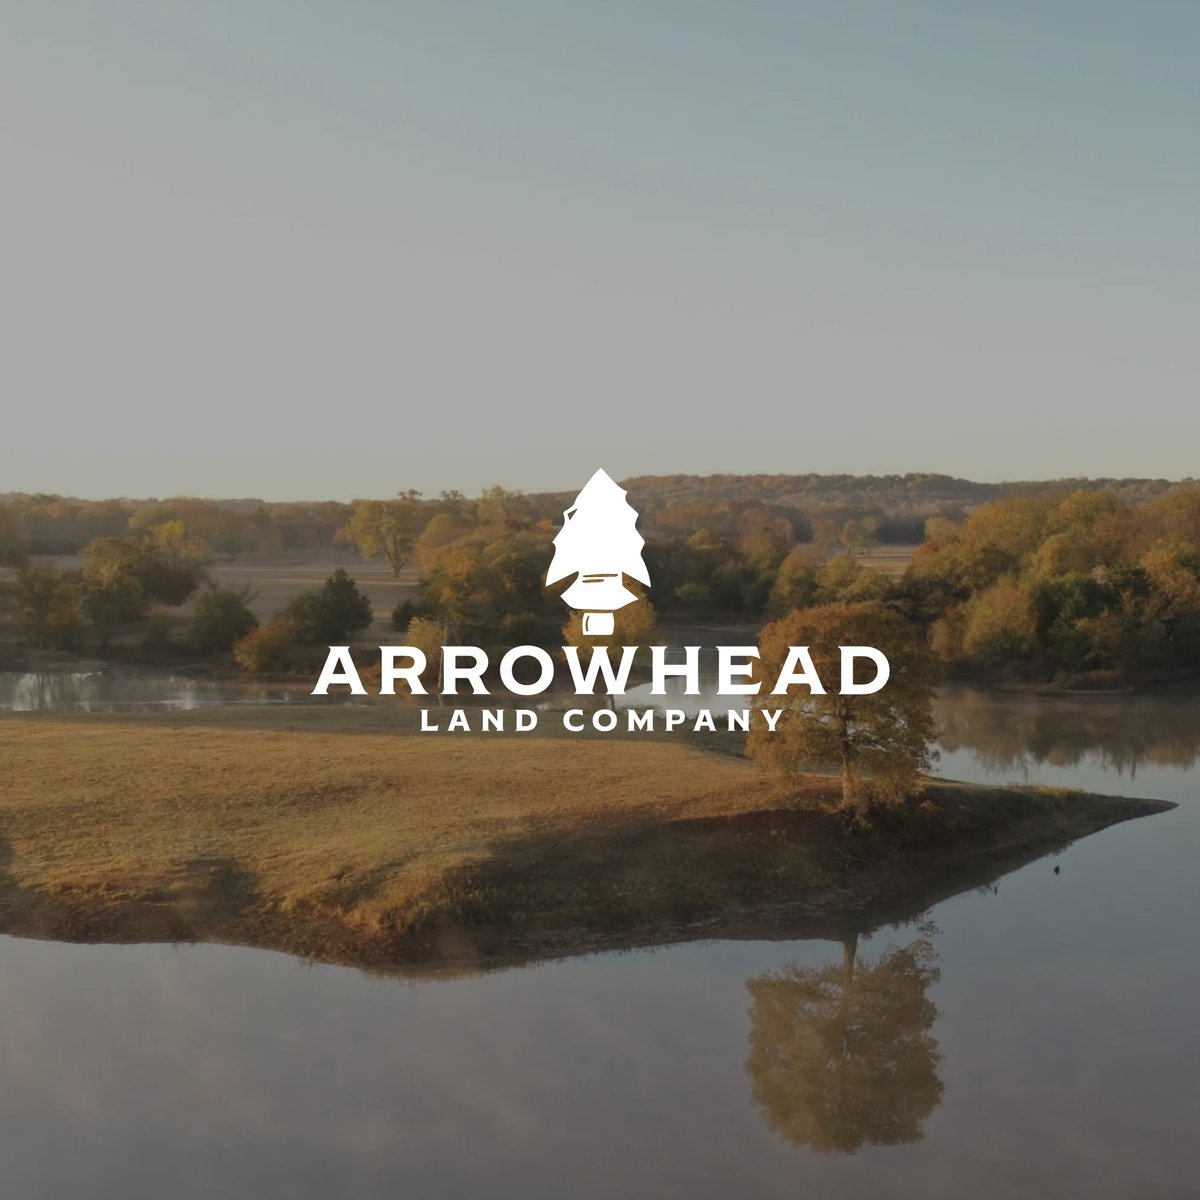 Land id™ presents the Spotlight Creator of the Week: Arrowhead Land Company

Learn more about our Spotlight Creator by visiting our blog at the link in bio^

#propertymapping #landidentity #property #realestate #mobileapp #propertyboundaries #propertyinfo #parcel #mapping